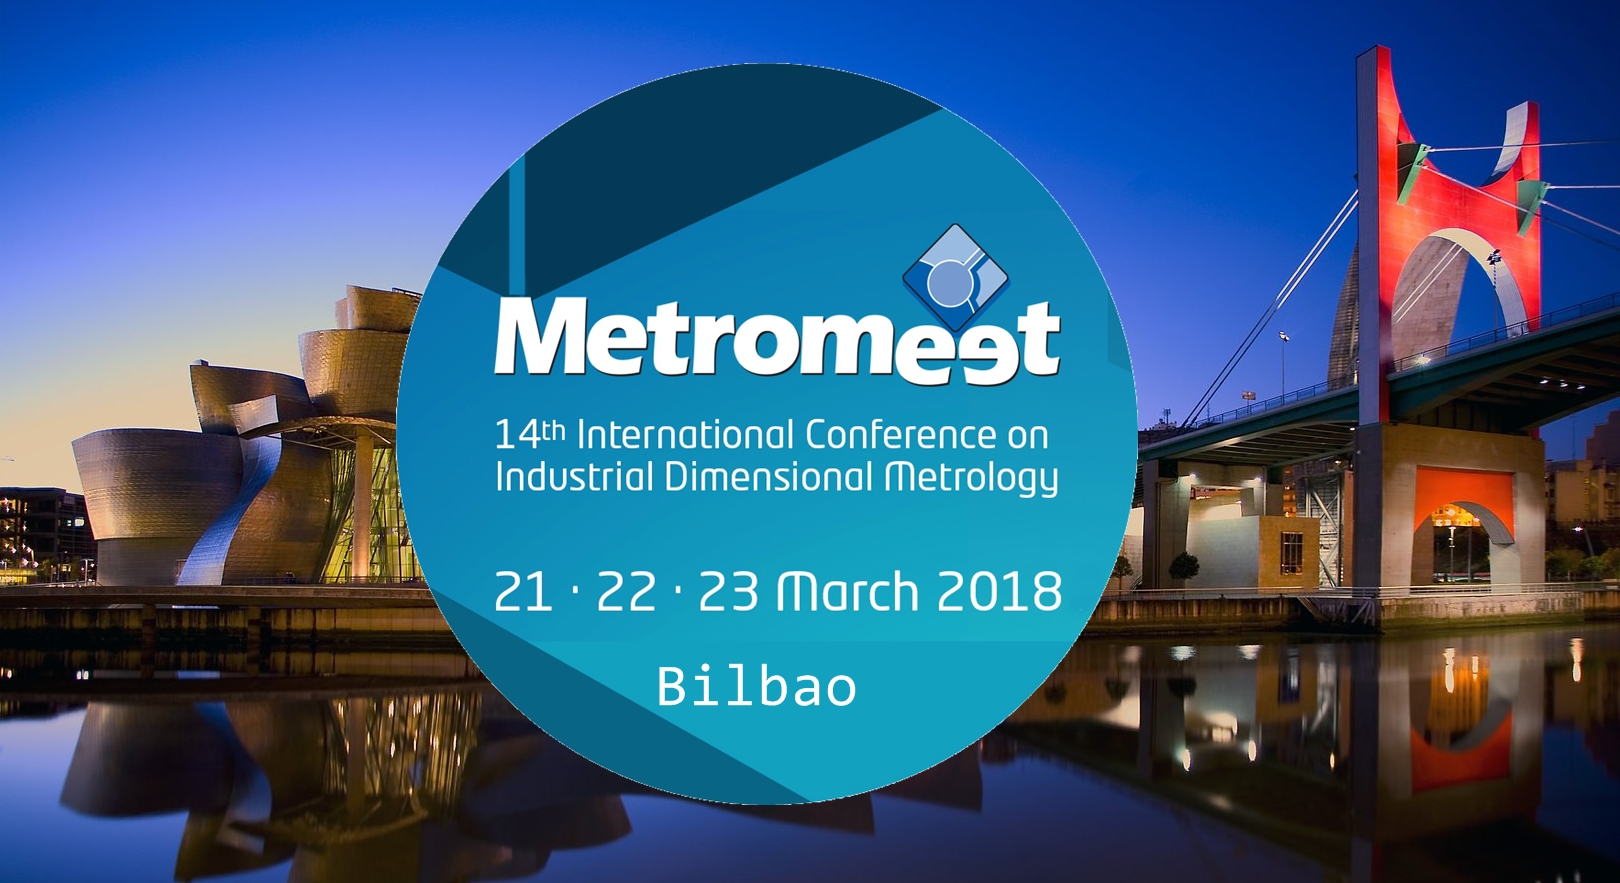 Metromeet invites you to be part of the speaker panel for its 14th edition